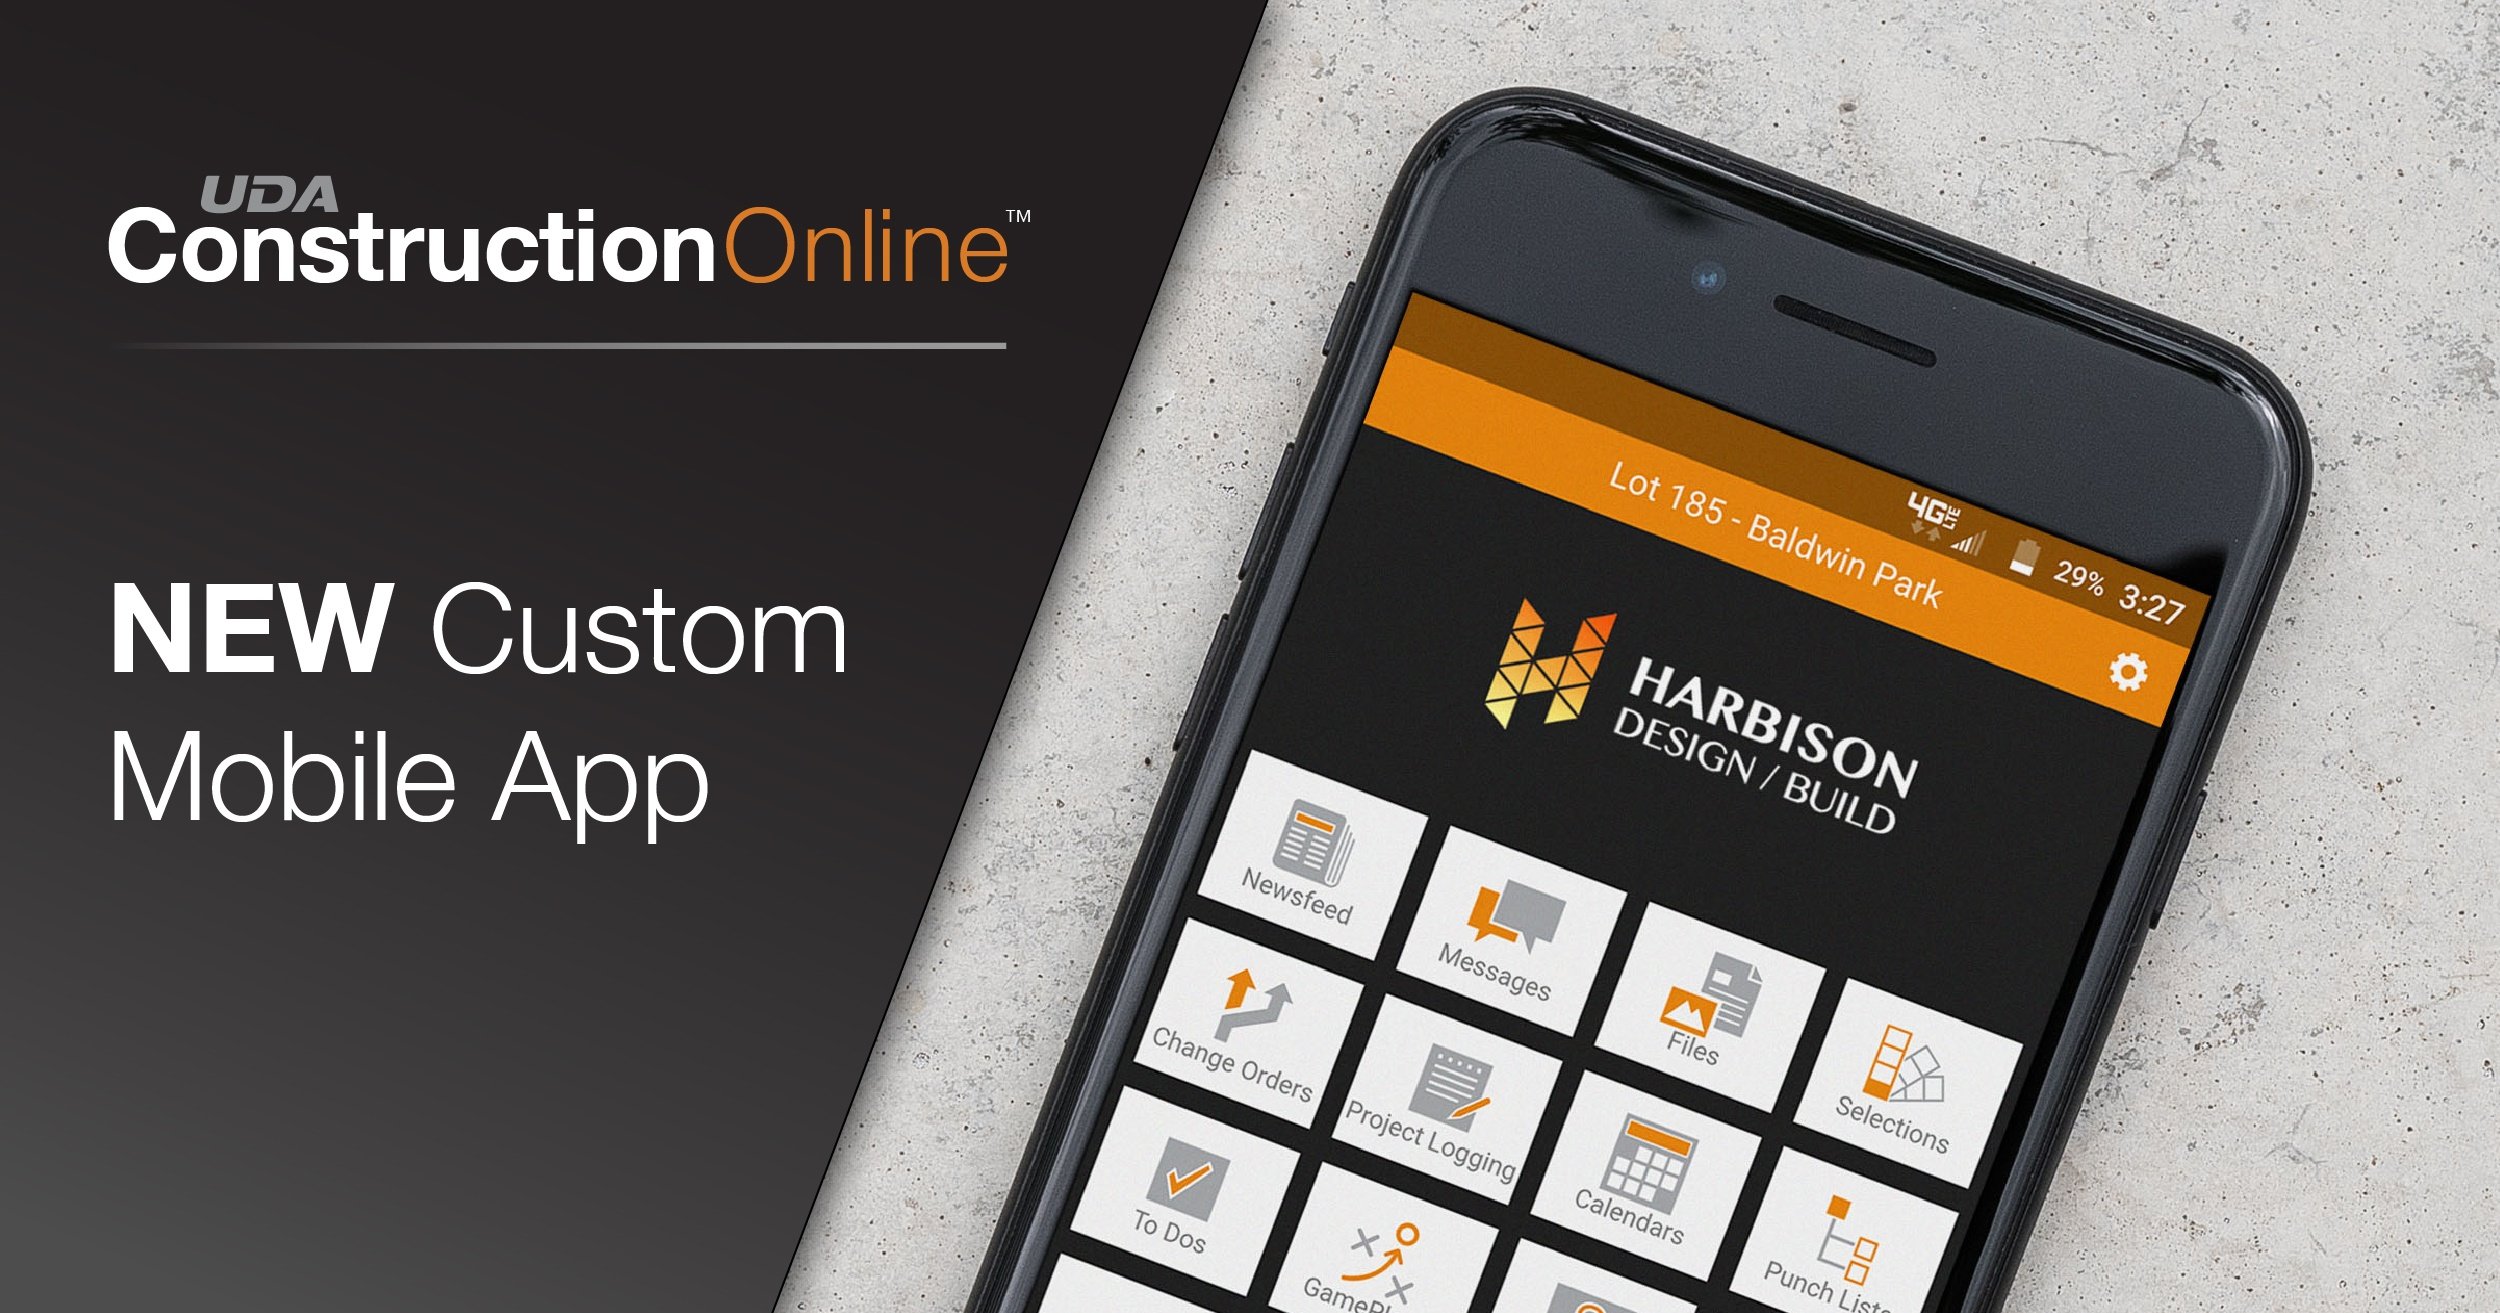 Enhanced Custom App Available for ConstructionOnline Subscribers